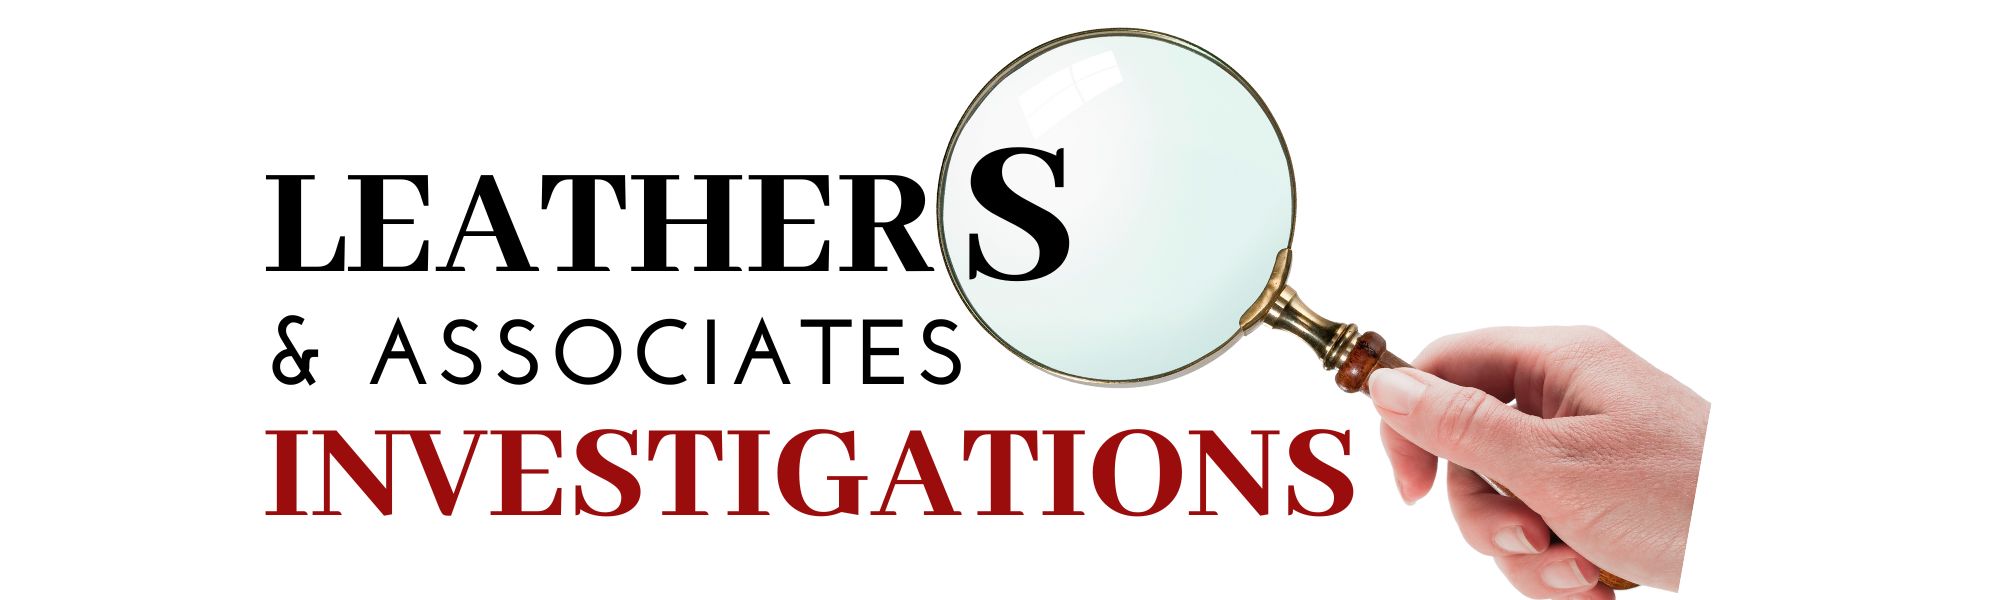 leathers and associates investigations